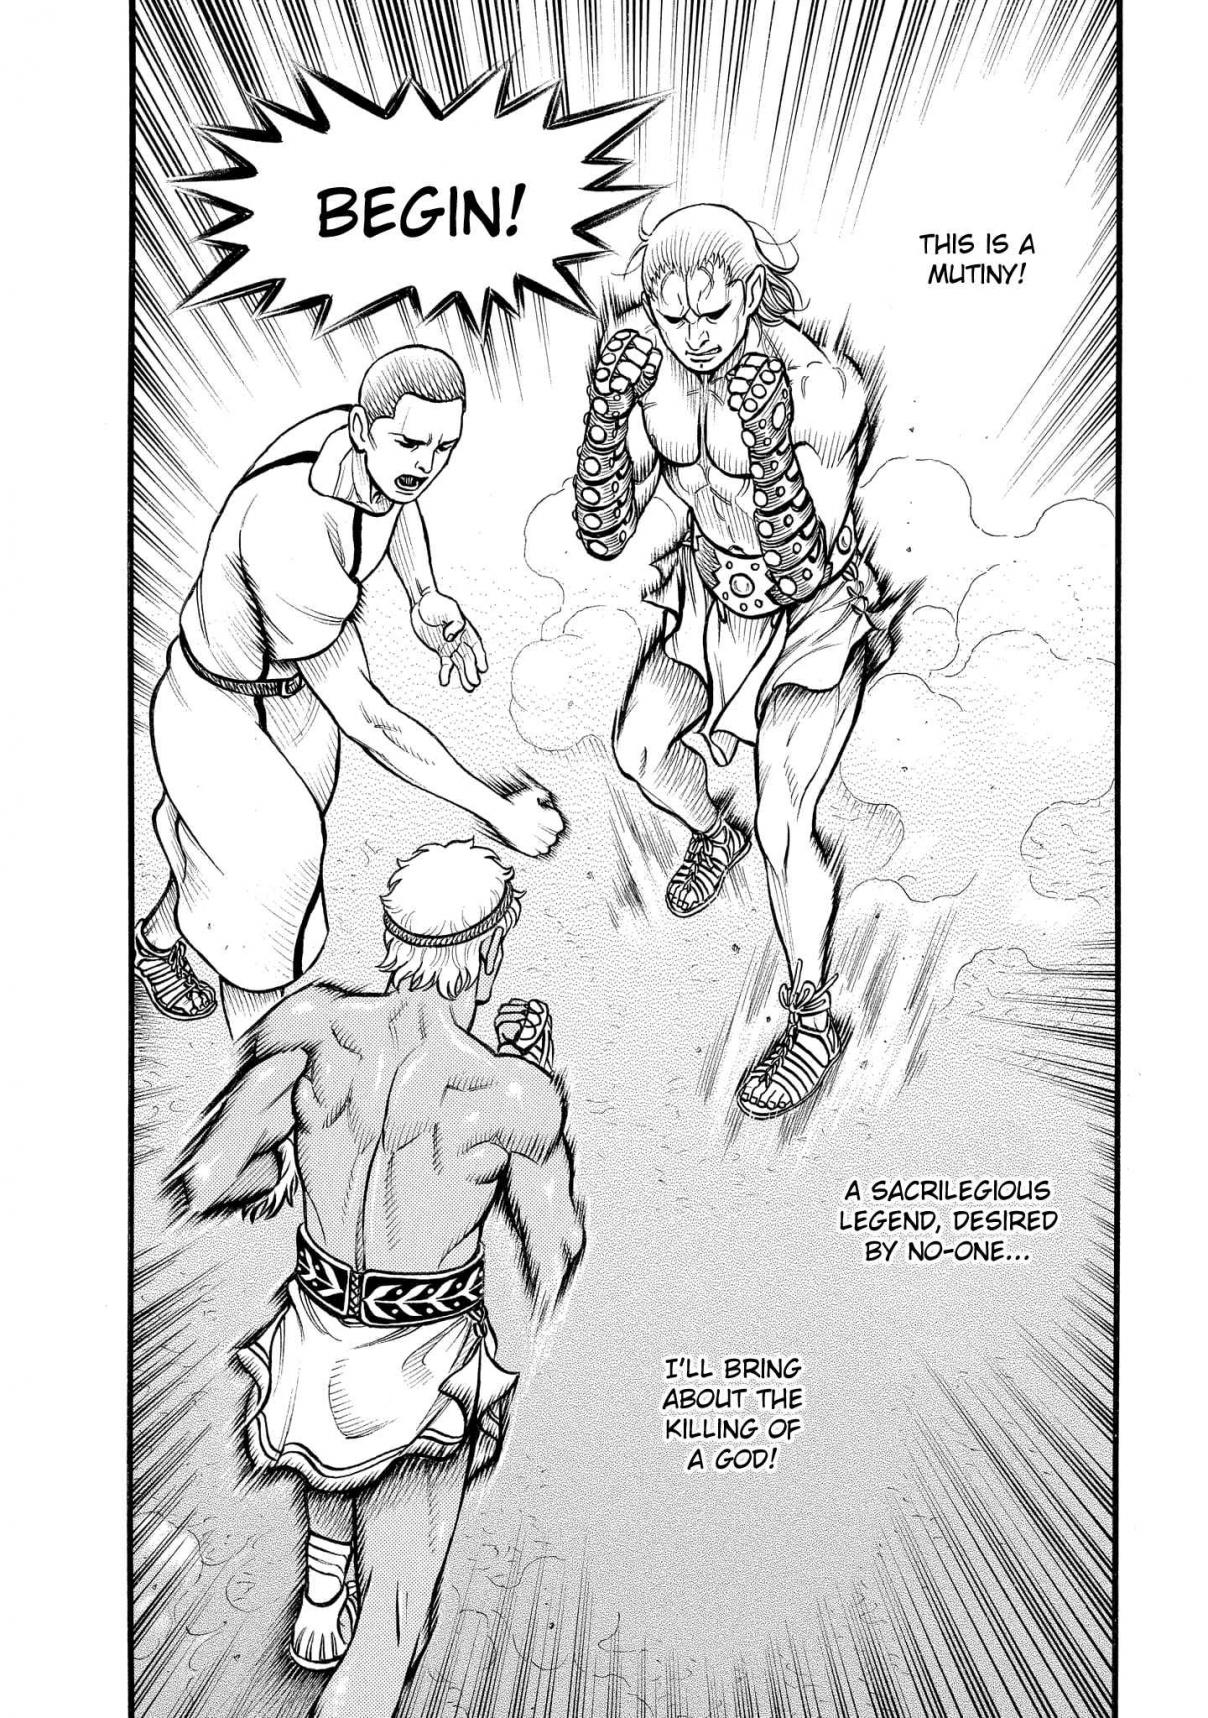 Kendo Shitouden Cestvs Vol. 8 Ch. 77 The Very Image of Mutiny